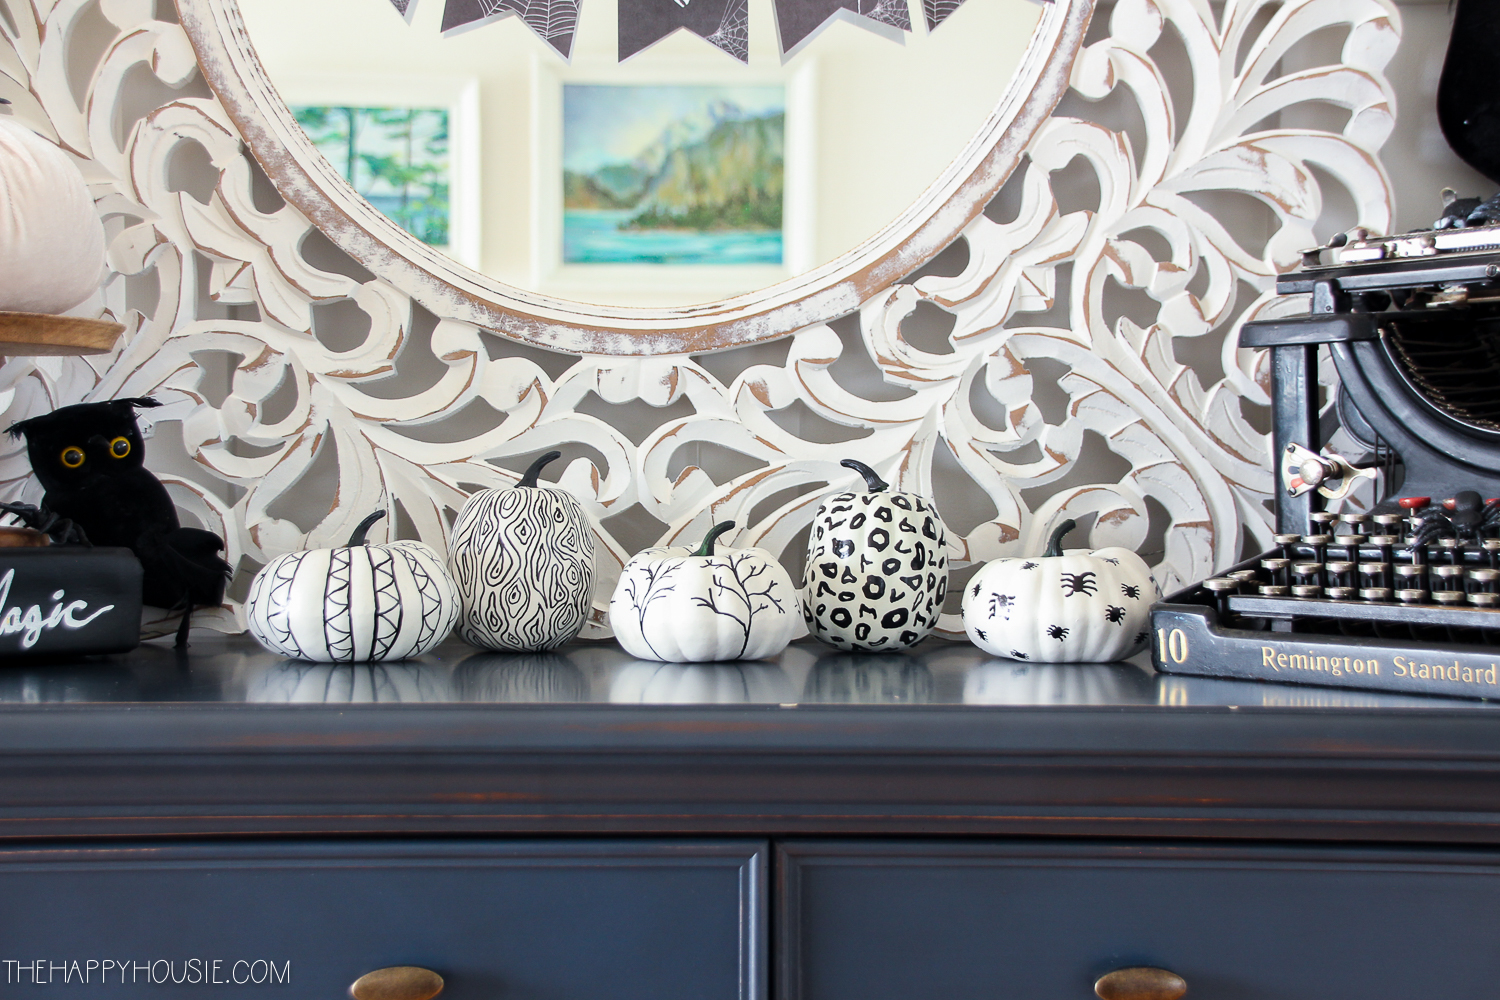 White pumpkins with black details on them.